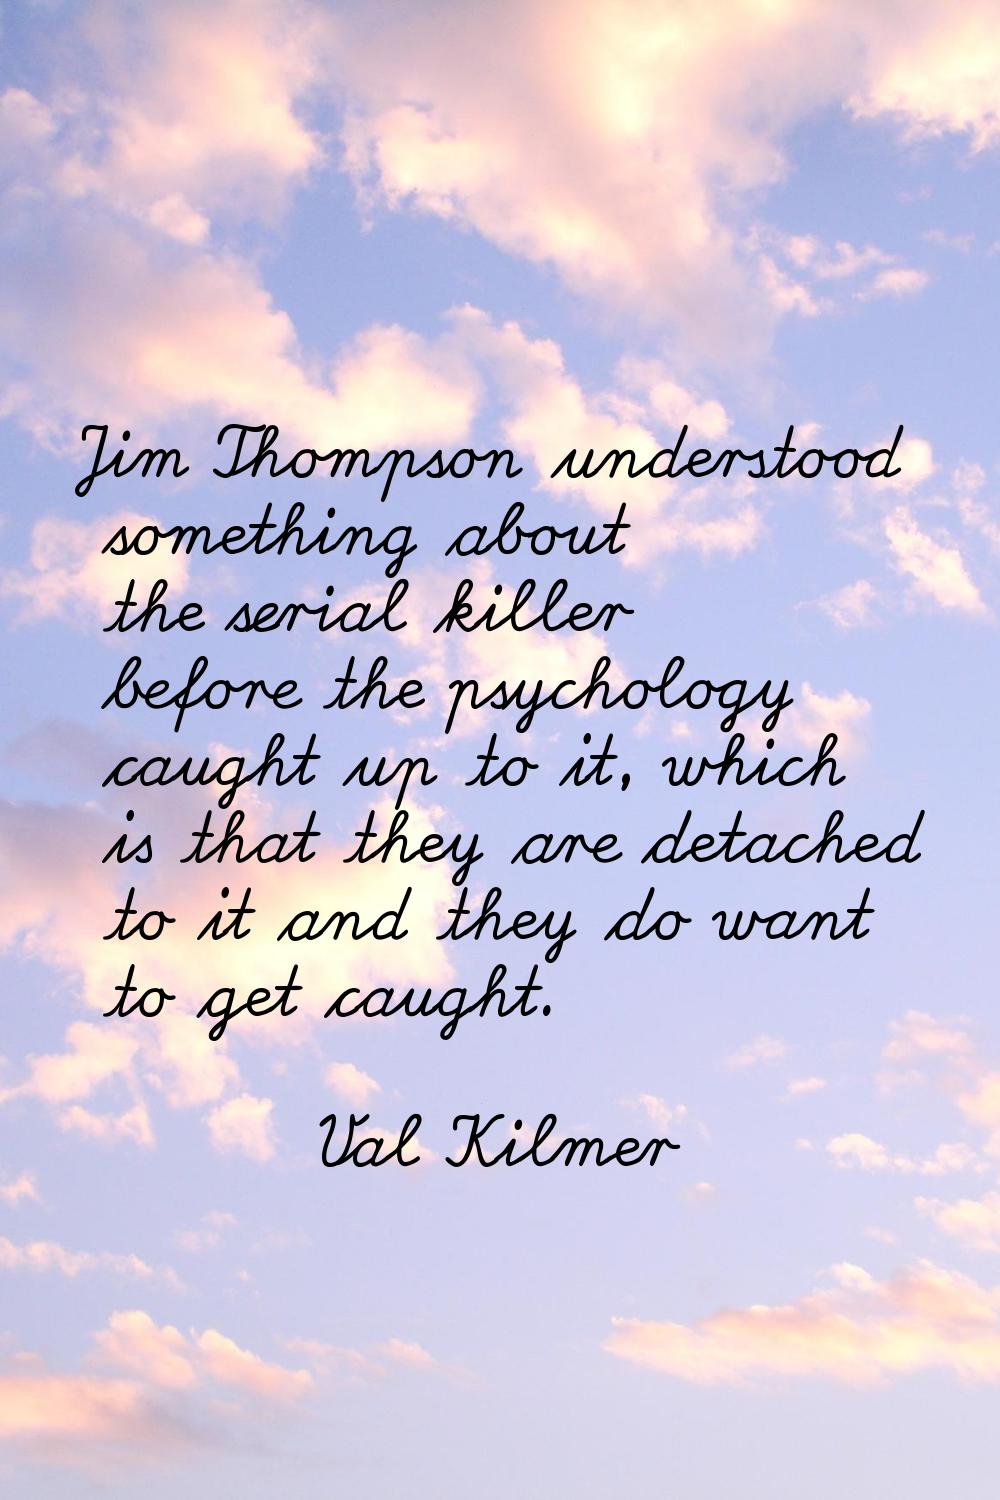 Jim Thompson understood something about the serial killer before the psychology caught up to it, wh